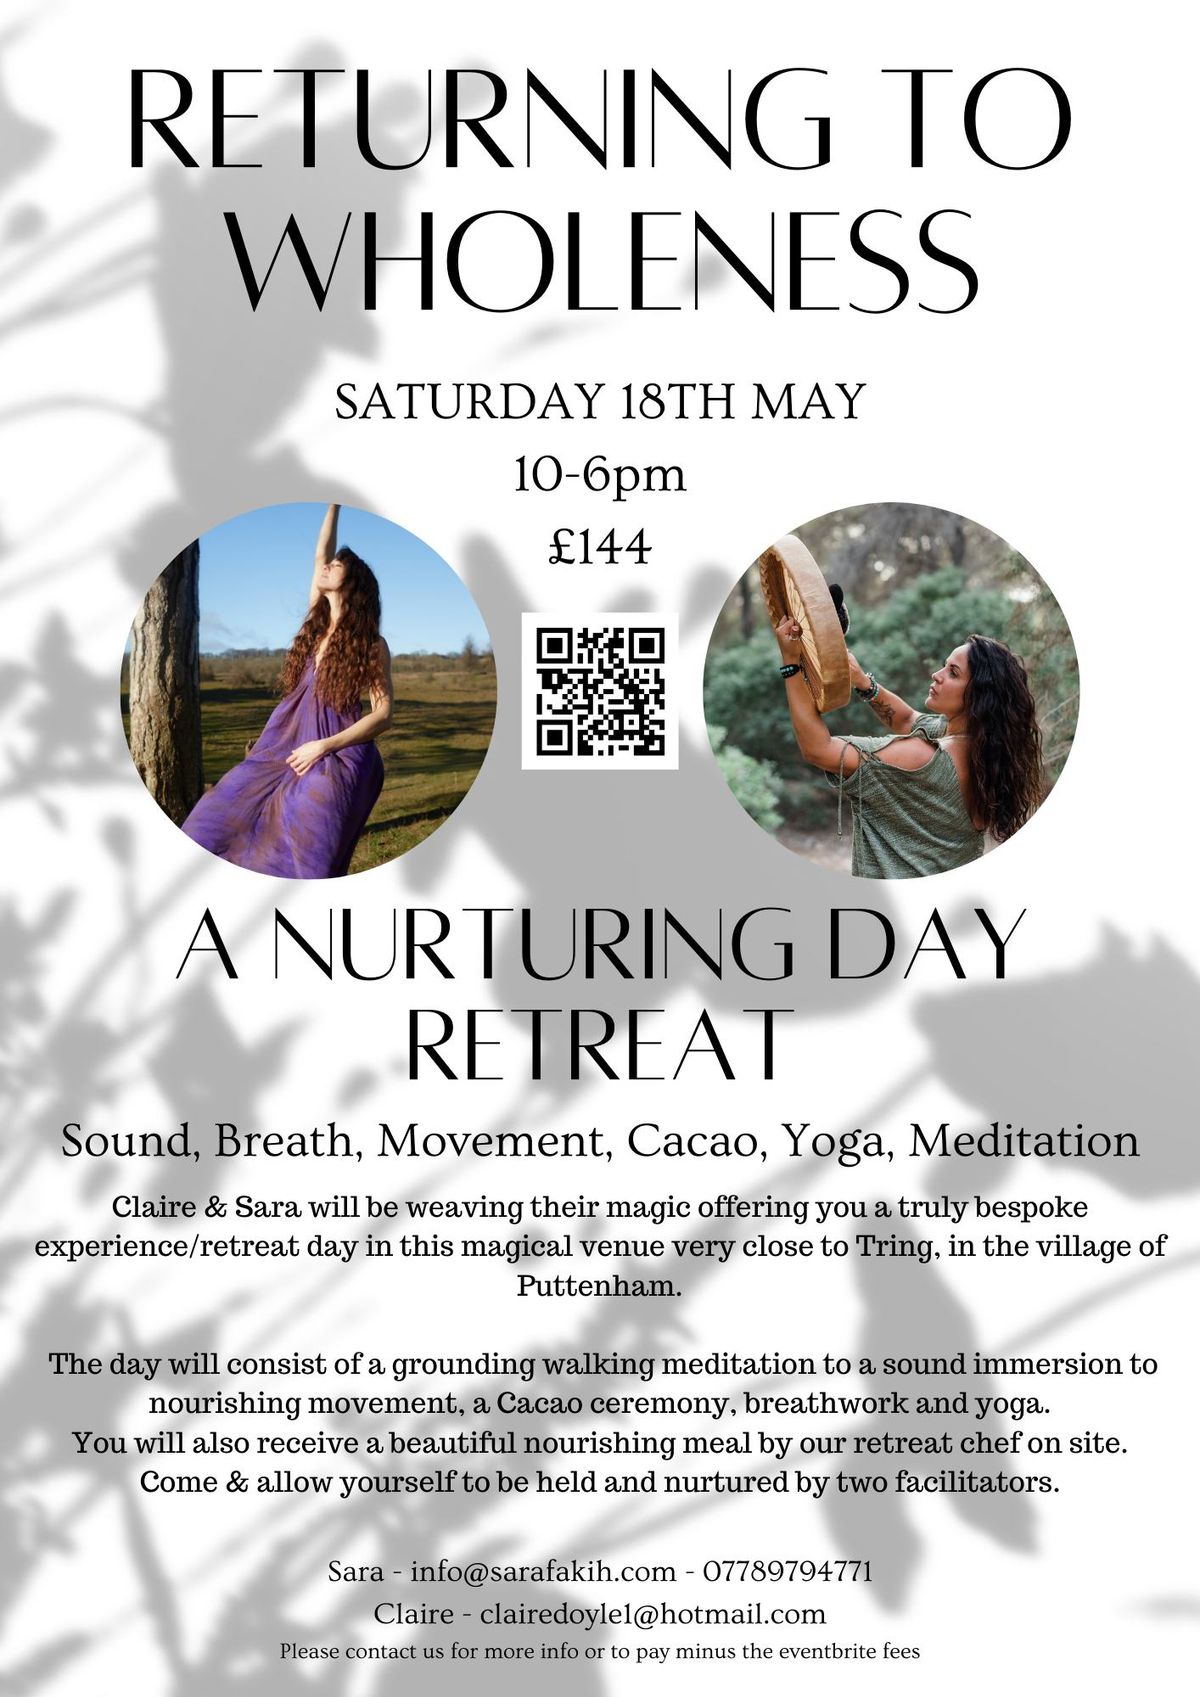 RETURNING TO WHOLENESS DAY RETREAT